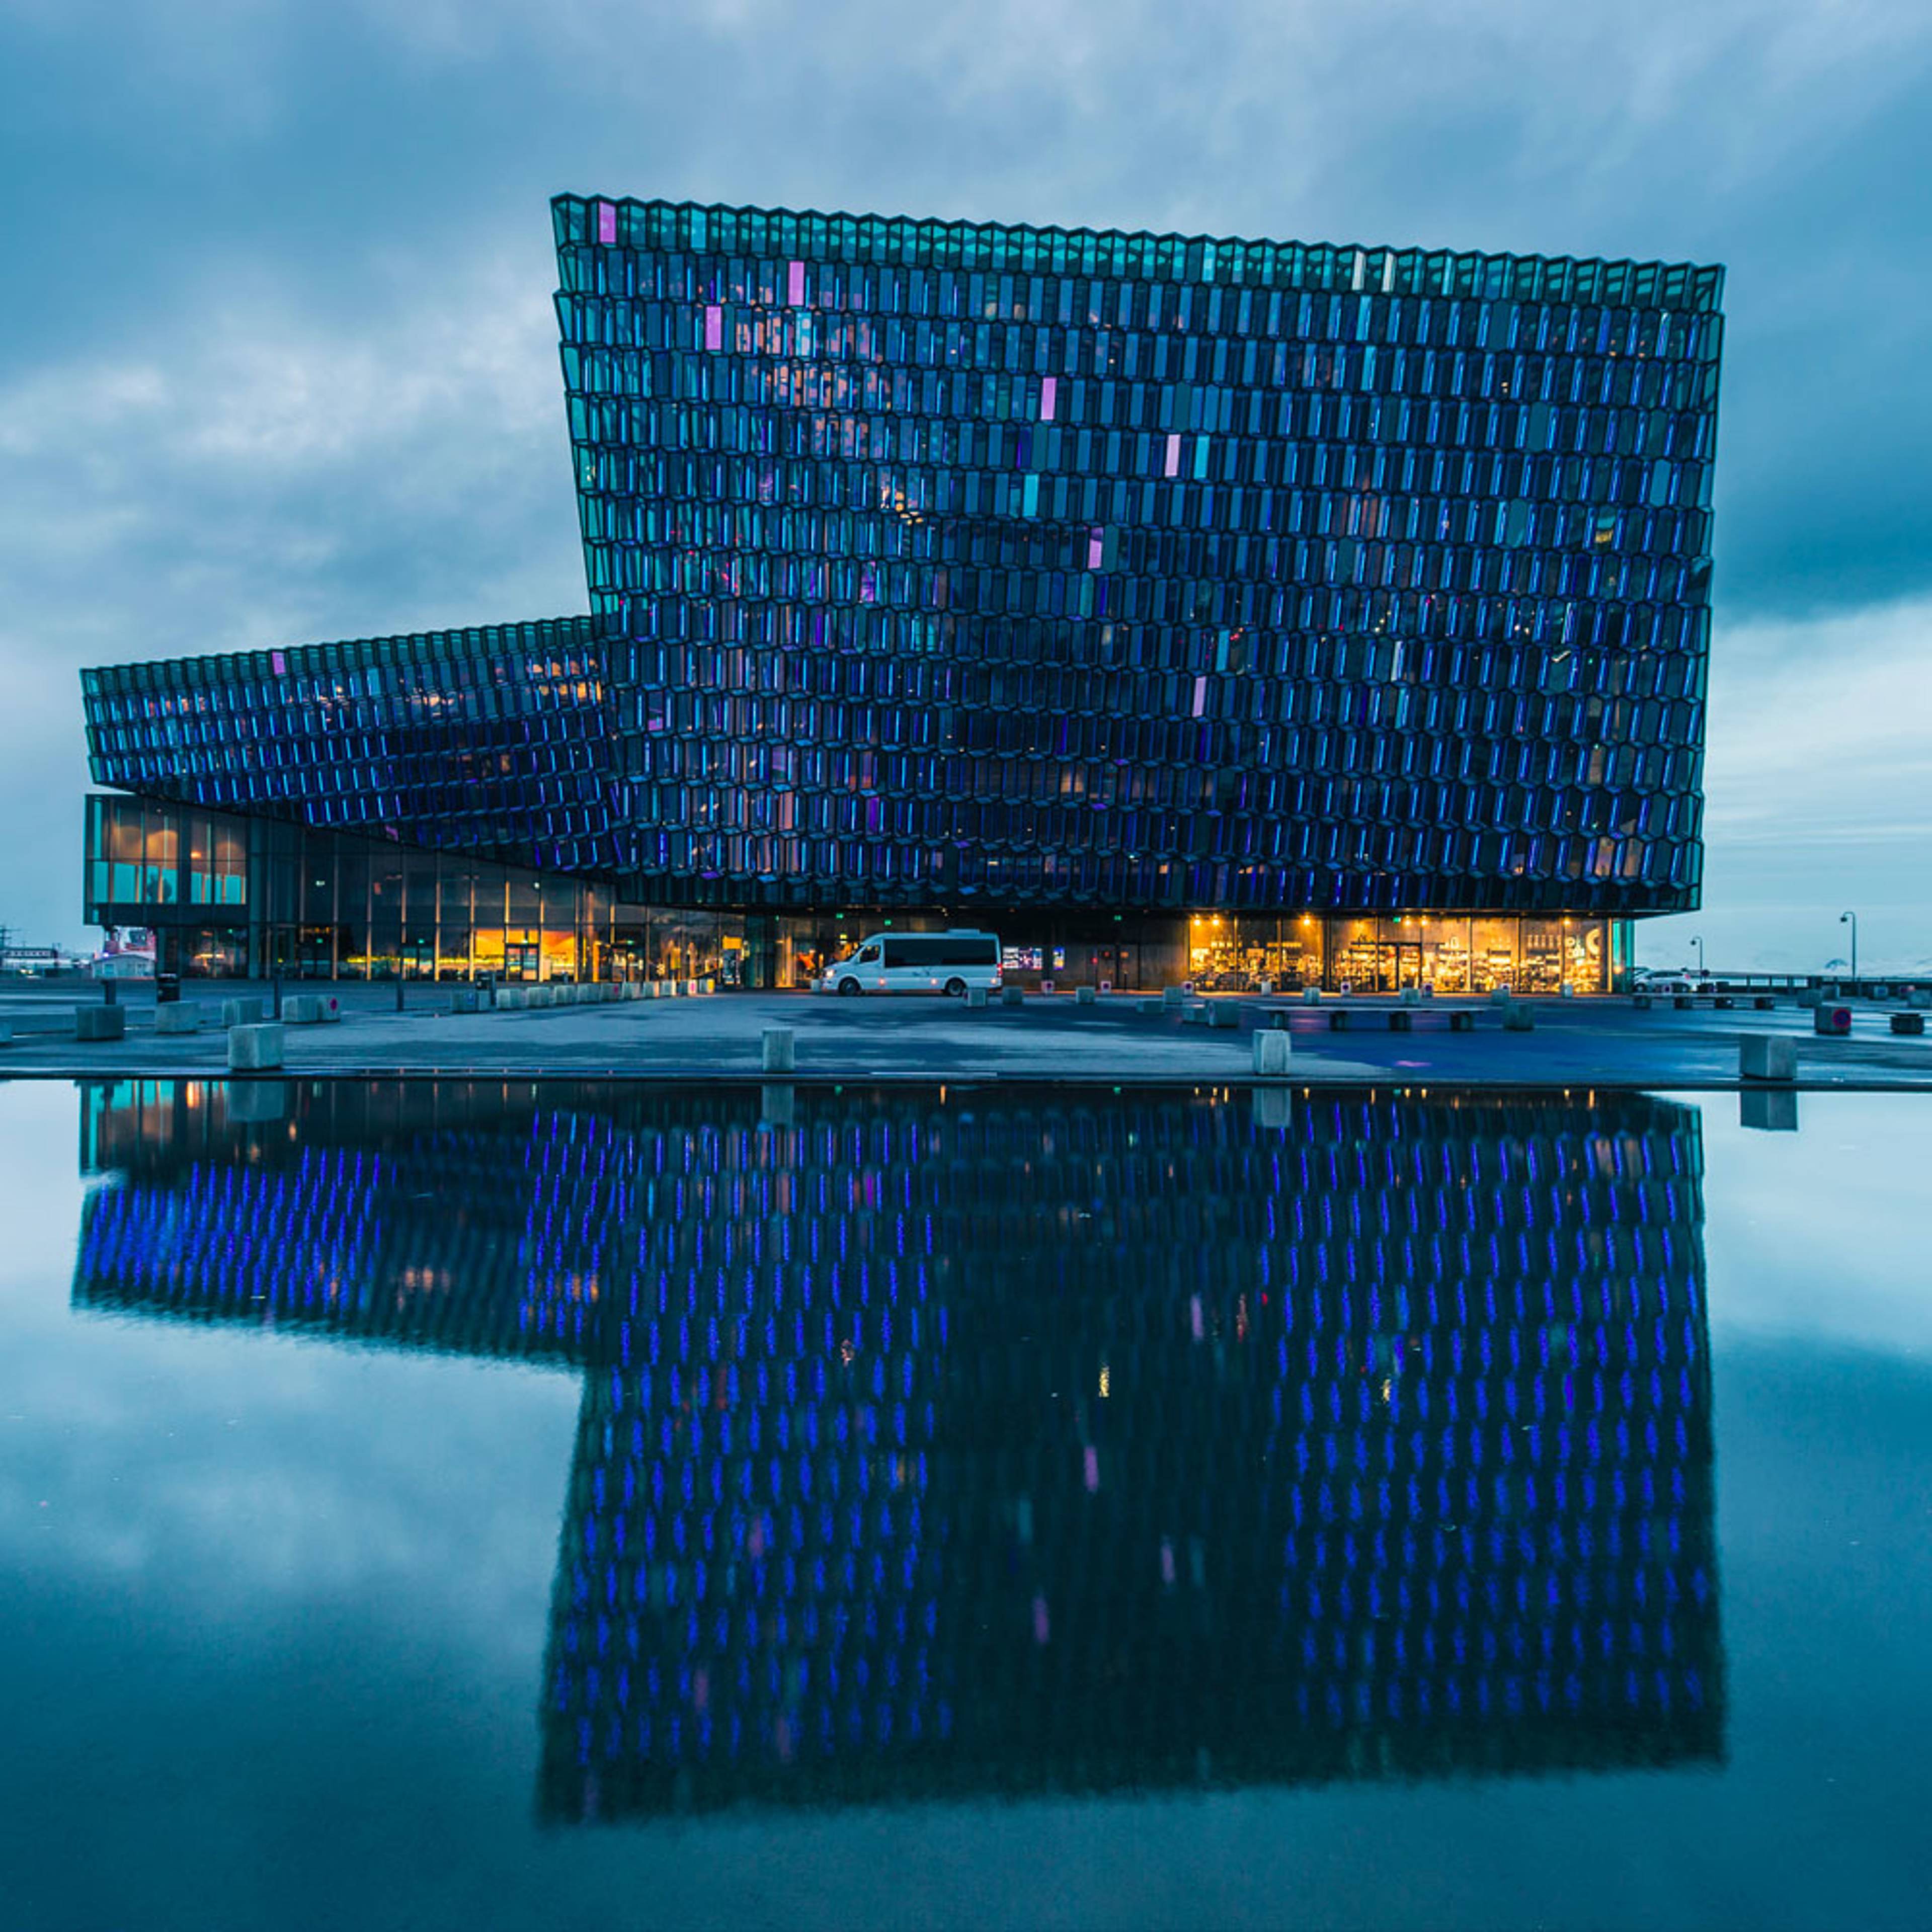 Design your perfect tour of Iceland's cities with a local expert